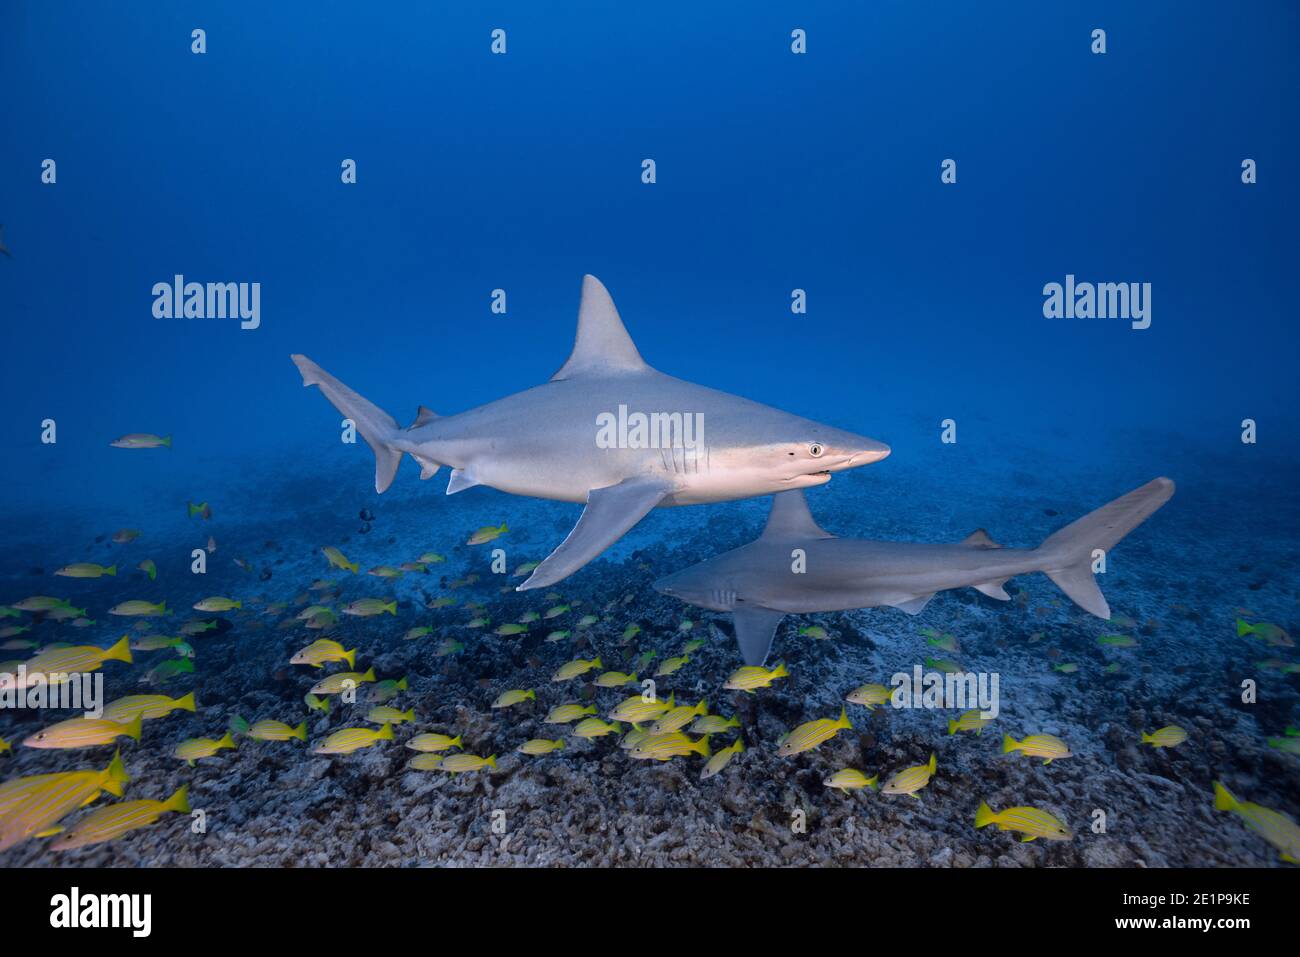 sandbar sharks, Carcharhinus plumbeus, with parasitic copepods on their heads, swim over a coral reef with school of bluestripe snapper, Kona, Hawaii Stock Photo